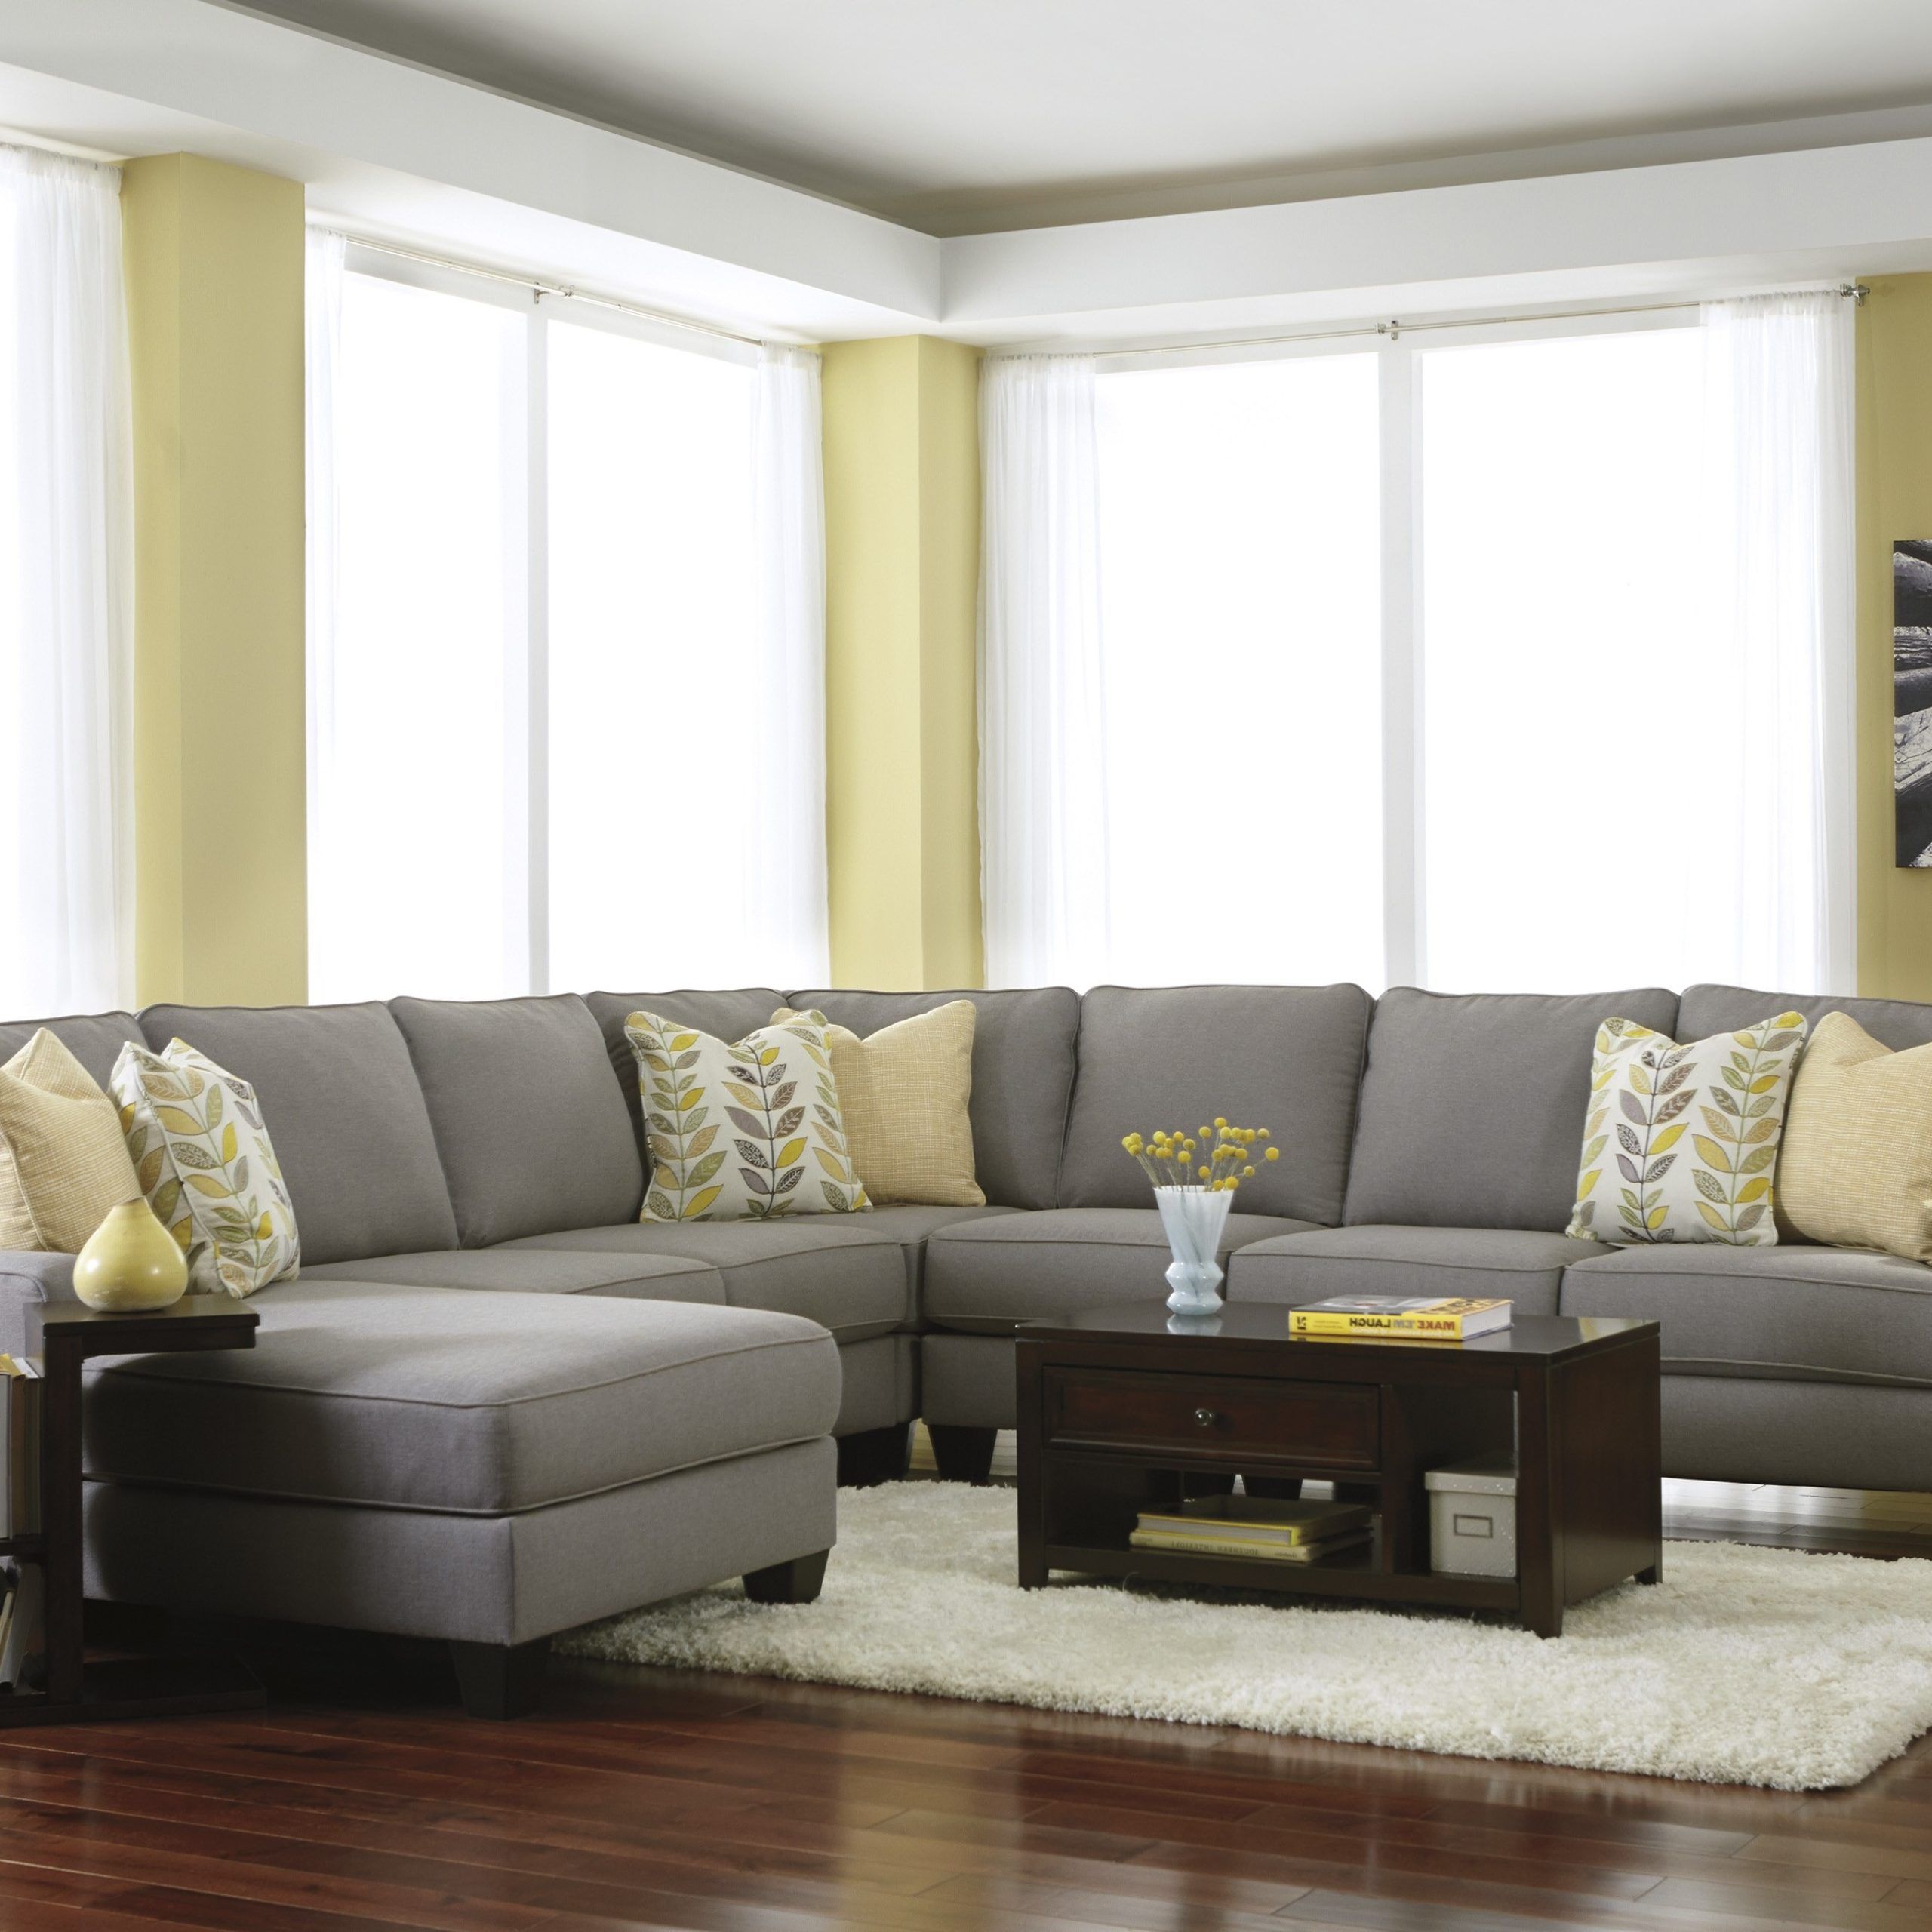 Living Room Ideas With Sectionals Sofa For Small Living Room Pertaining To Sofas For Living Rooms (Gallery 3 of 20)